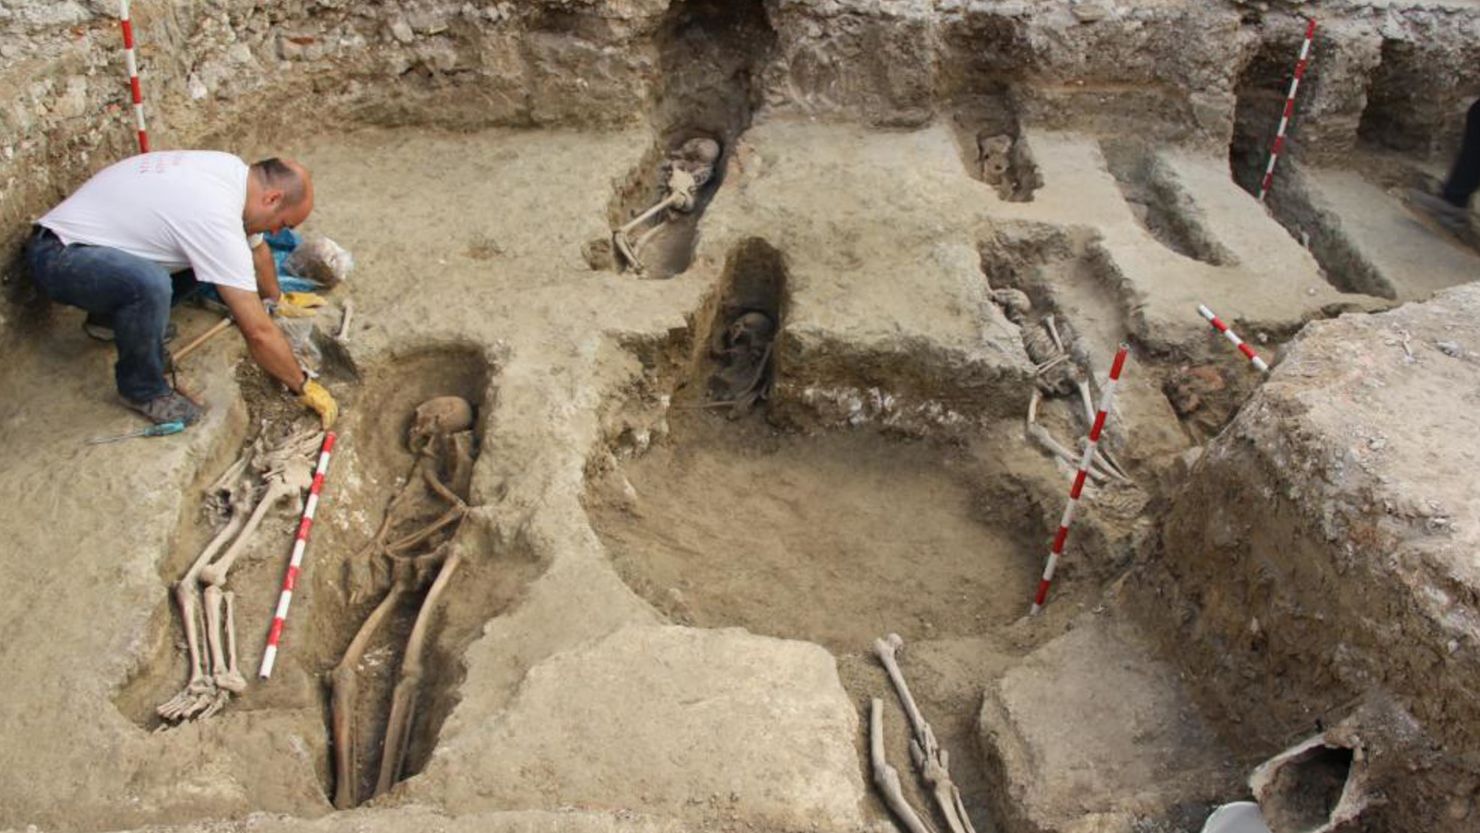 More than 400 tombs have been discovered in the extensive Muslim burial site after years of investigations and excavations. 